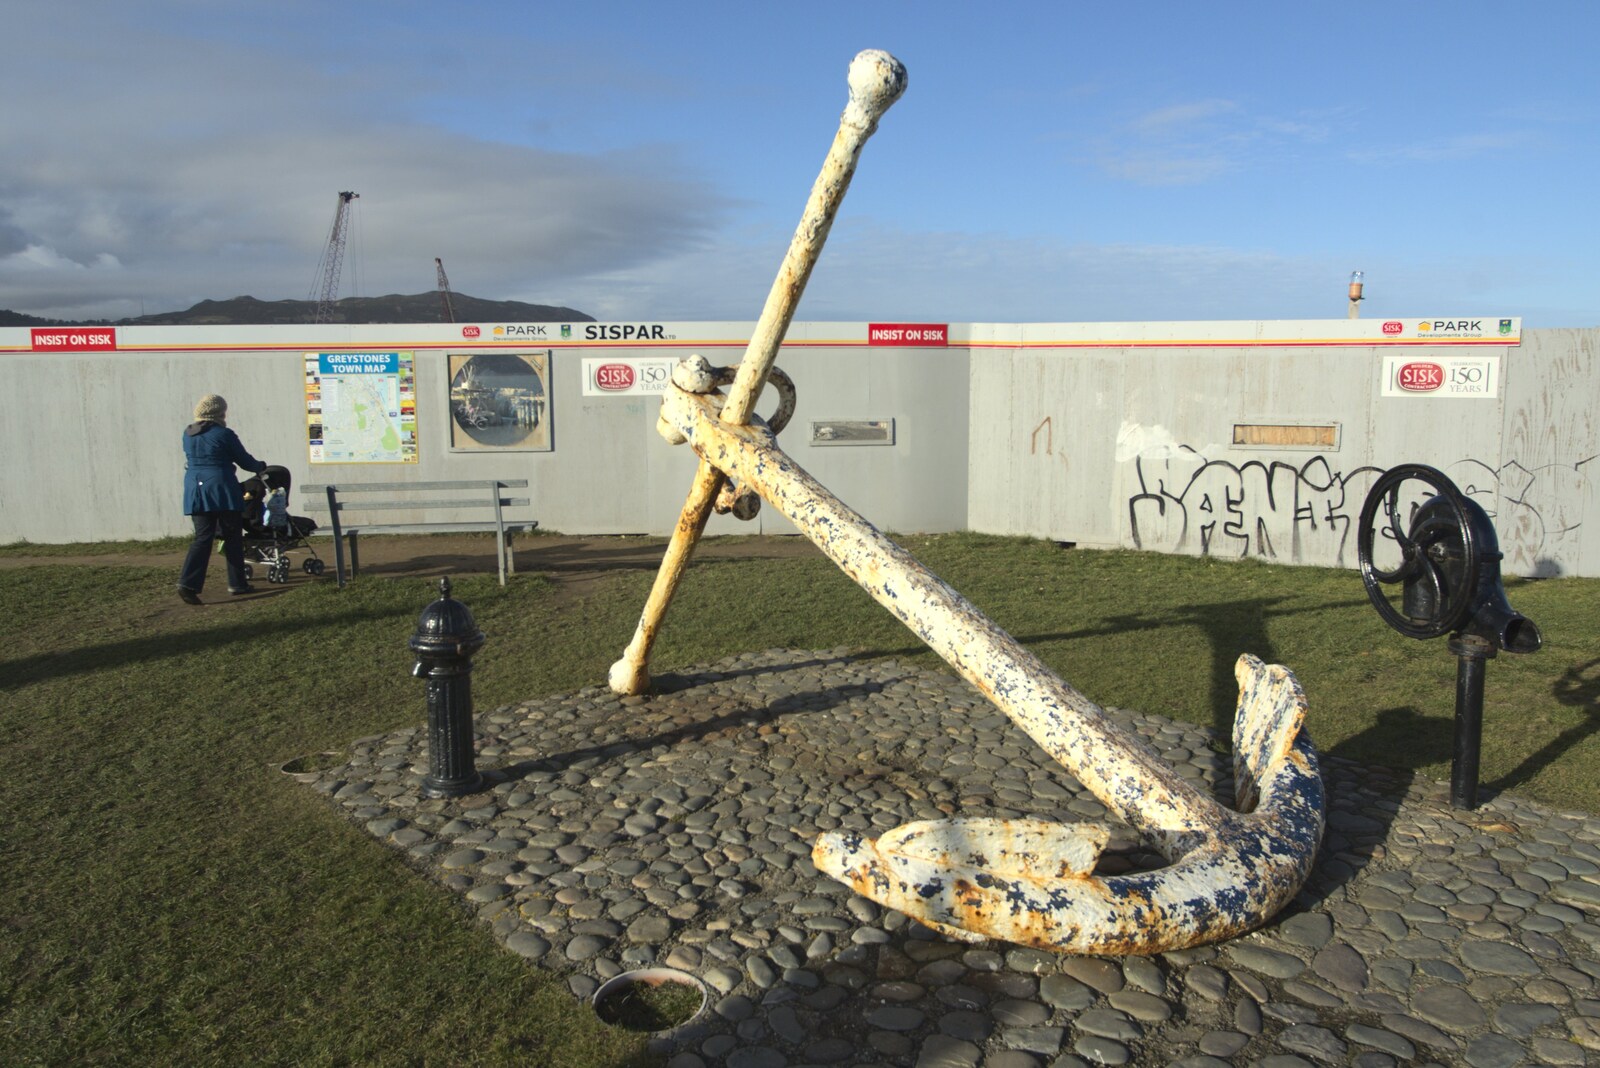 An anchor, surrounded by hoardings from A Day in Greystones, County Dublin, Ireland - 28th February 2010